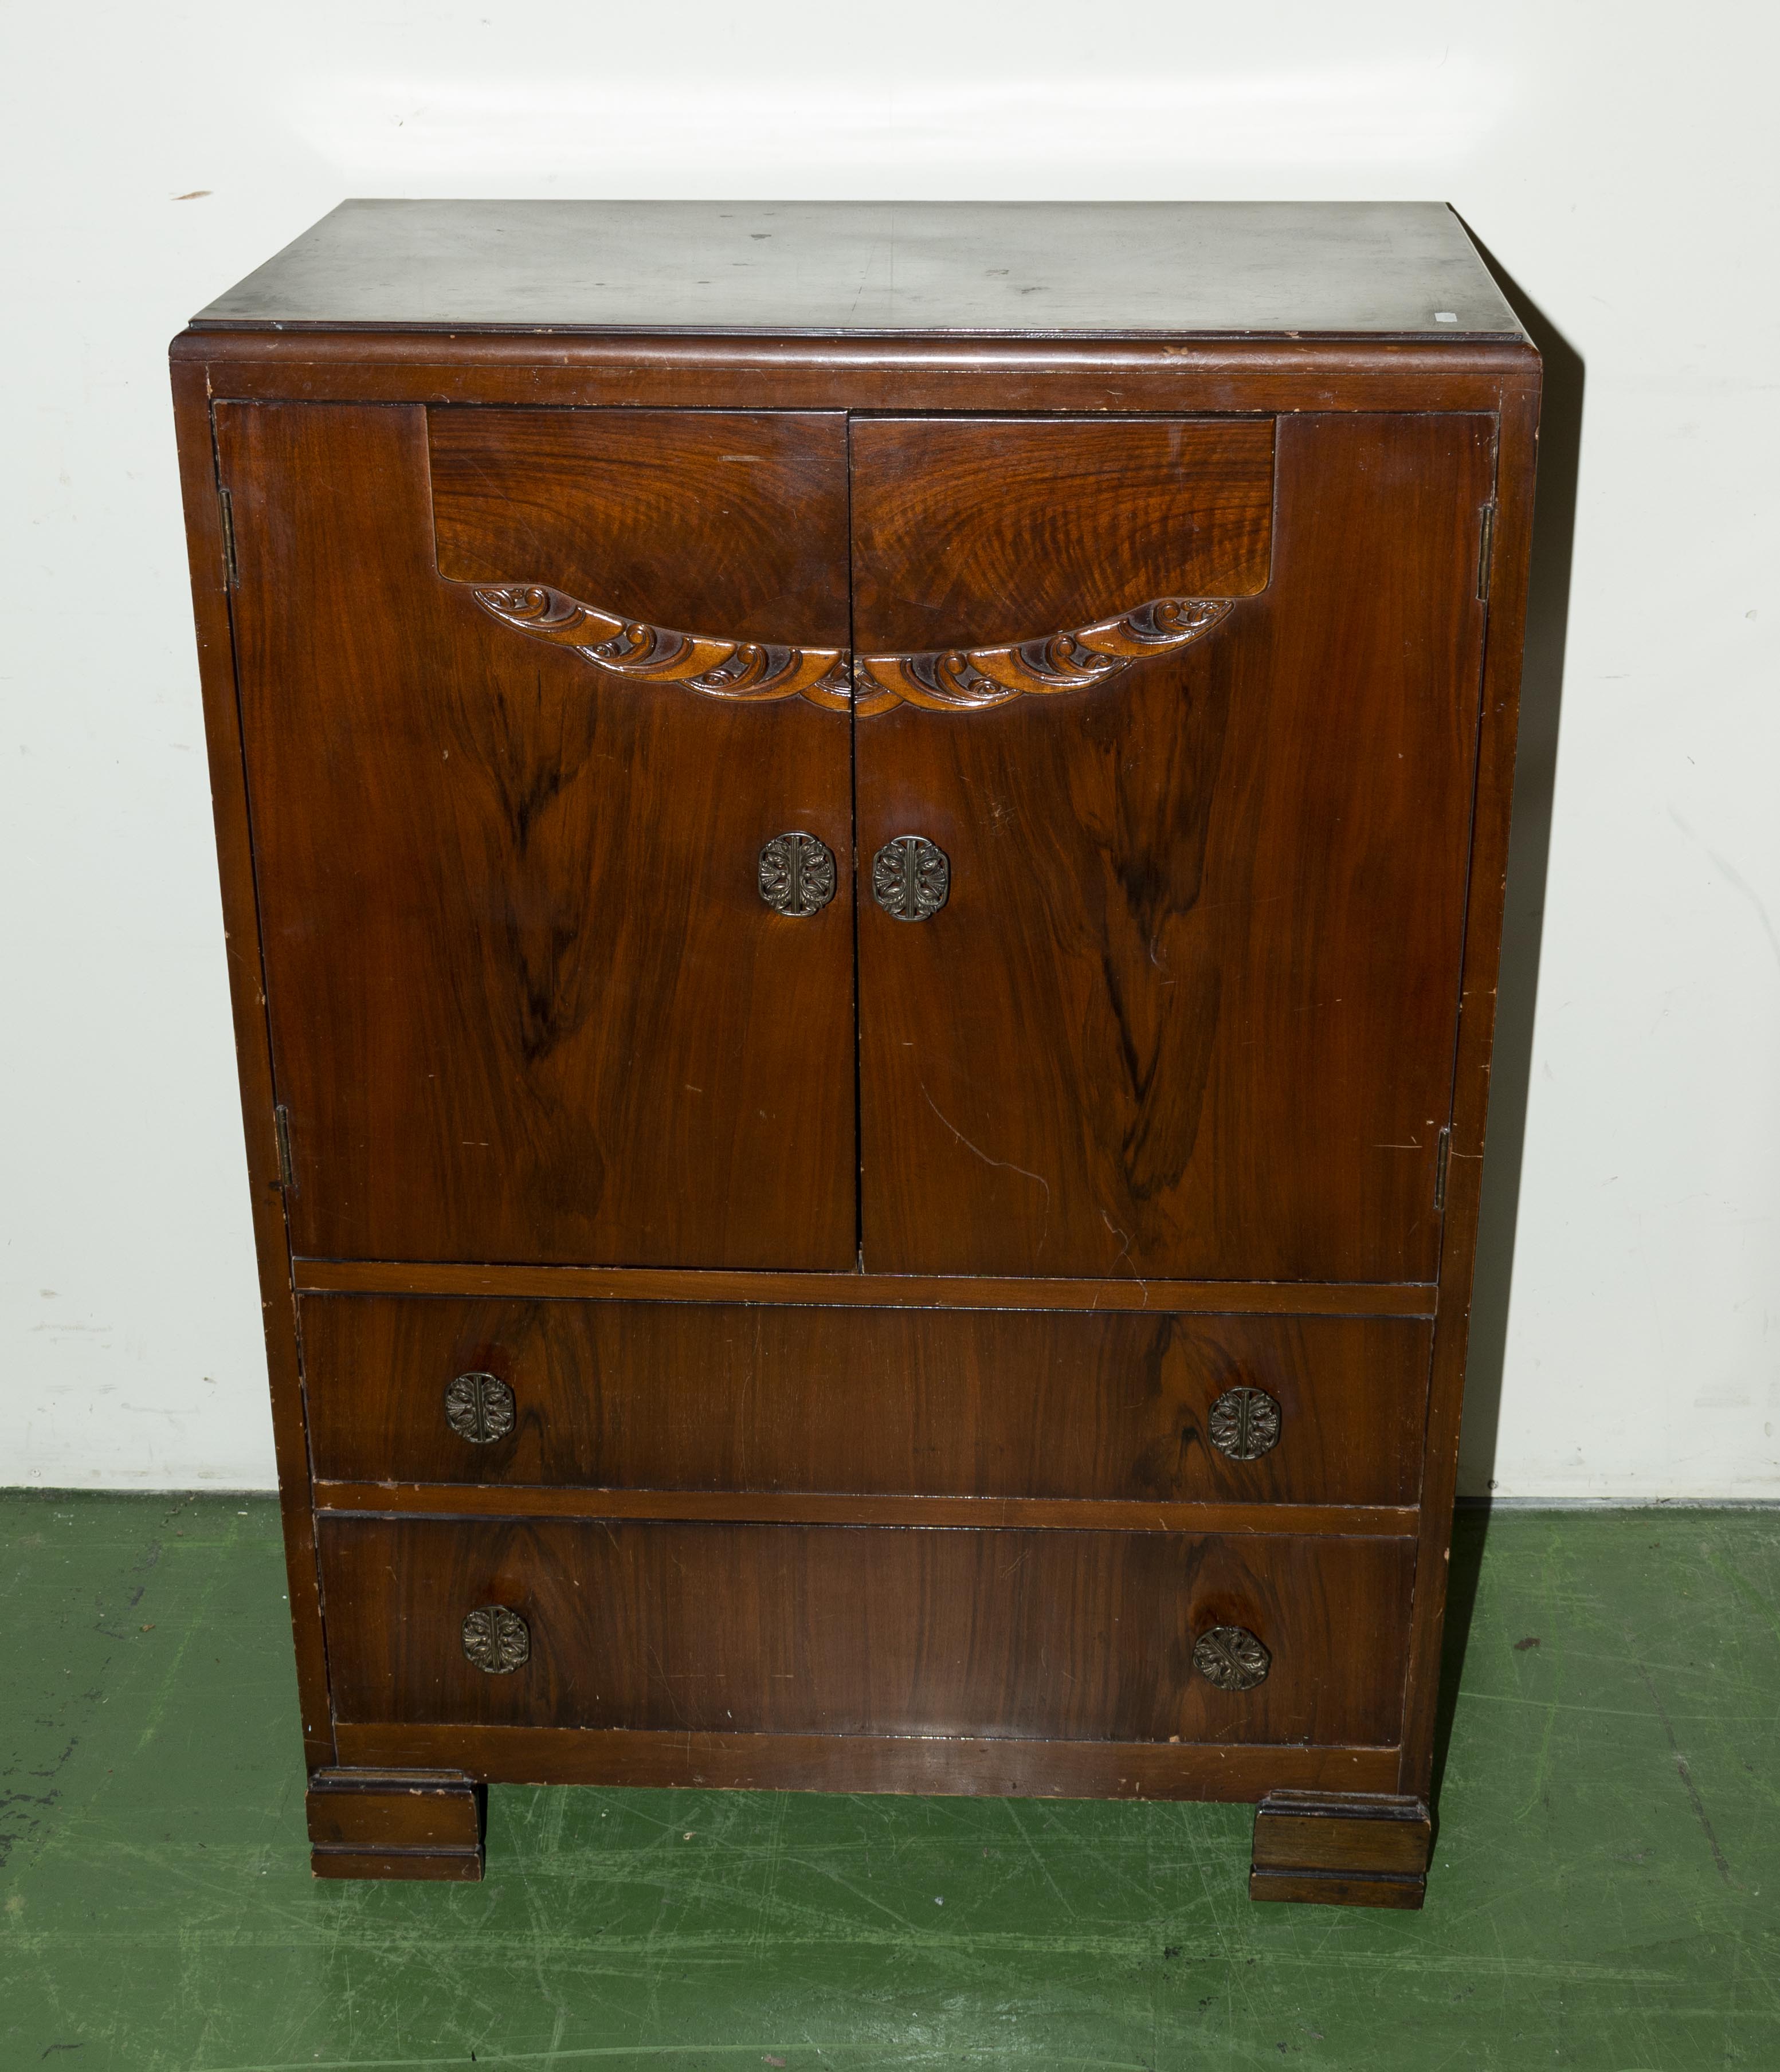 A cabinet with two drawers